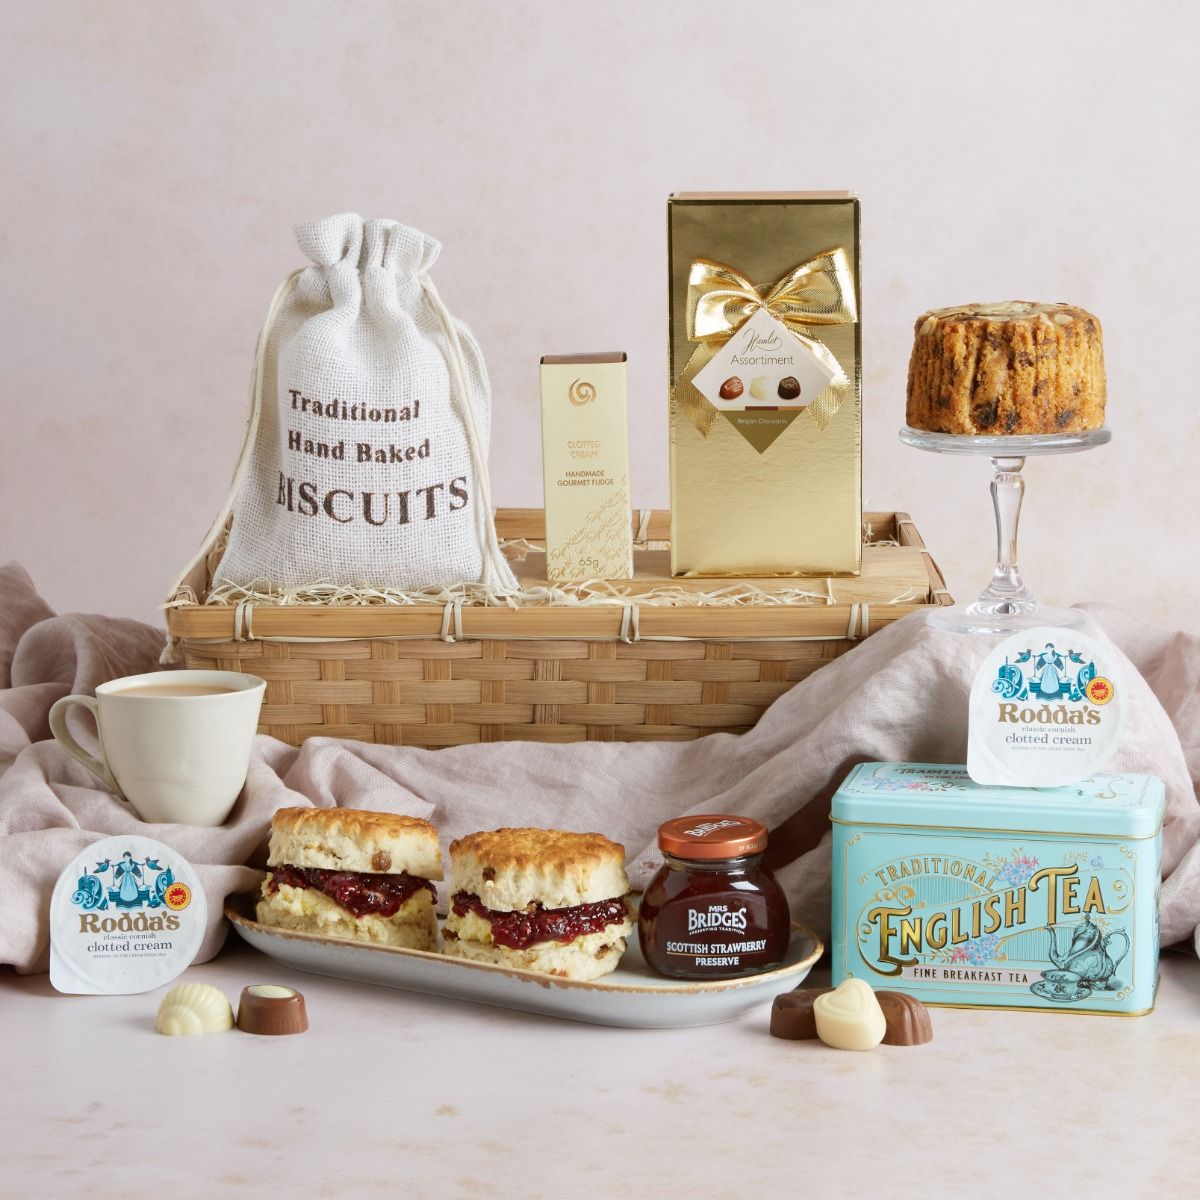 Luxury Cream Tea Gift Hamper with contents on display including scones topped with jam and clotted cream